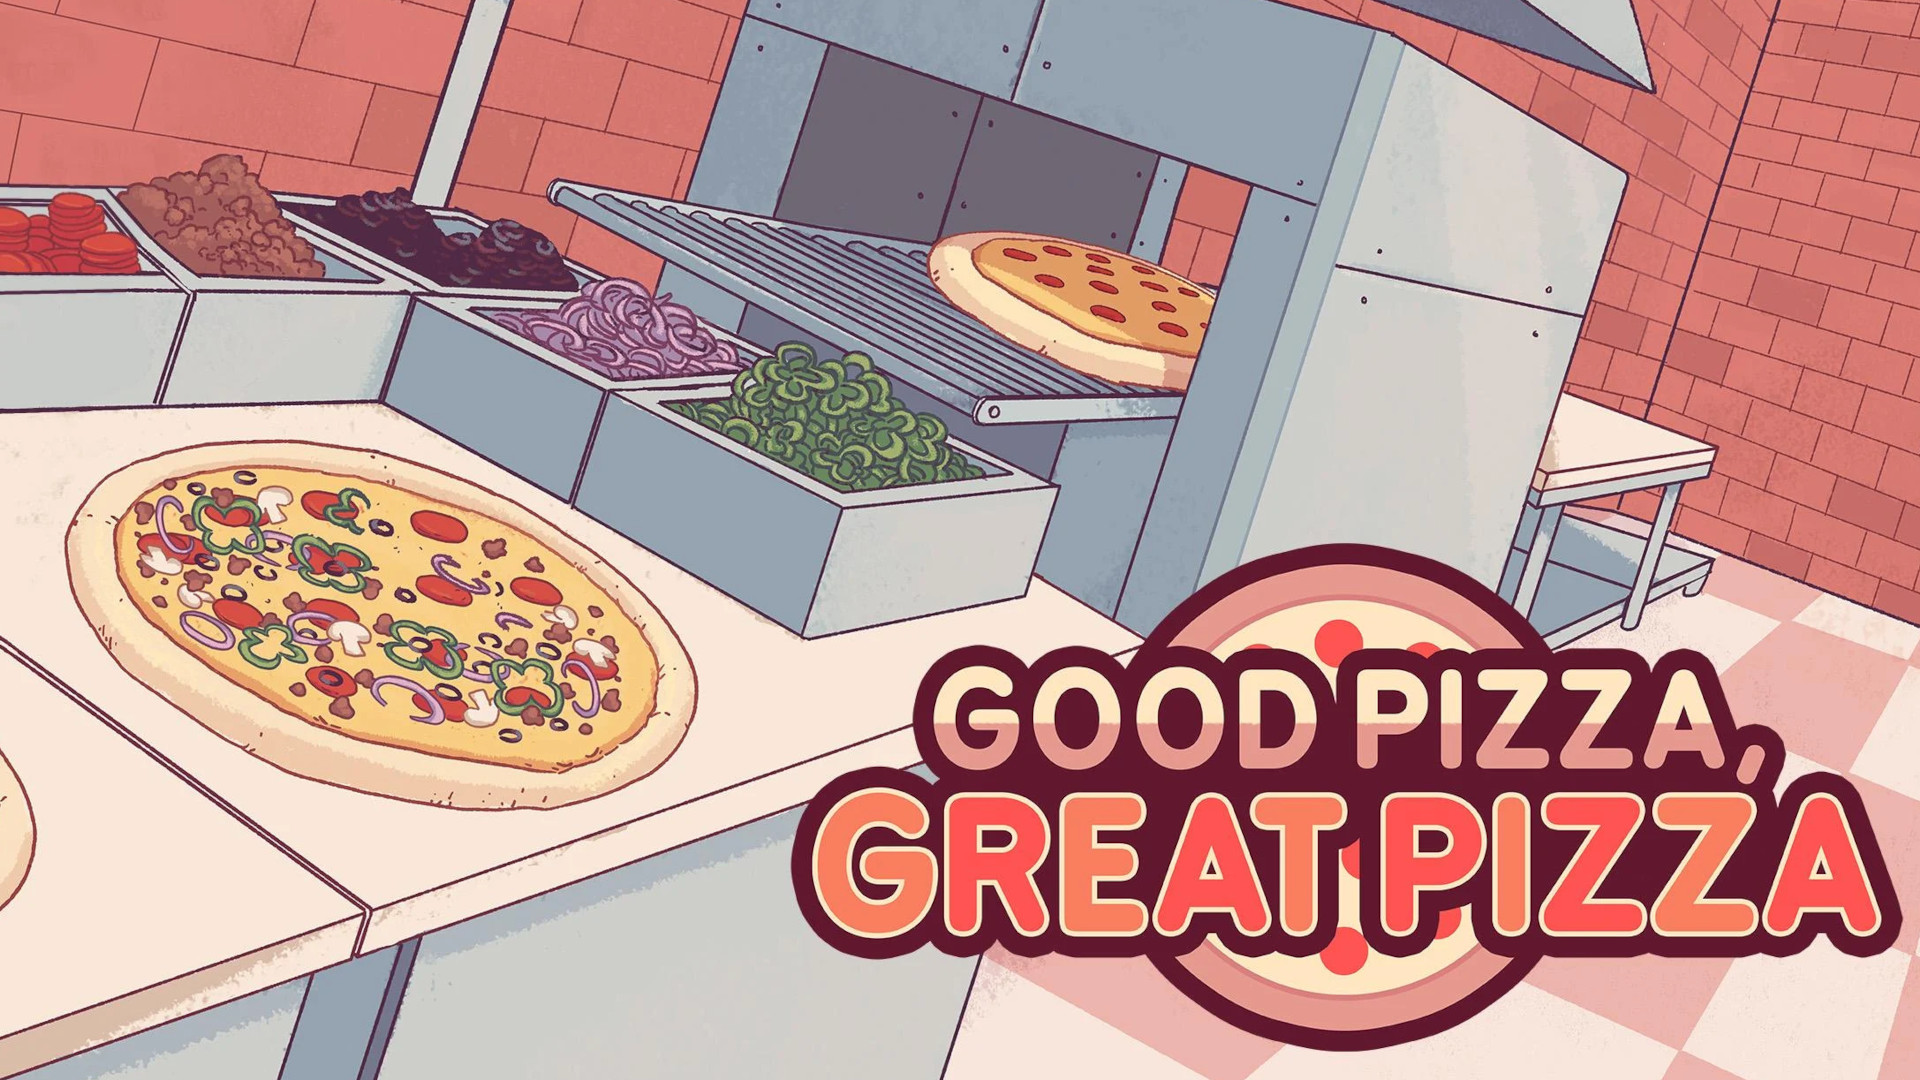 Pizza Maker game-Cooking Games - Apps on Google Play